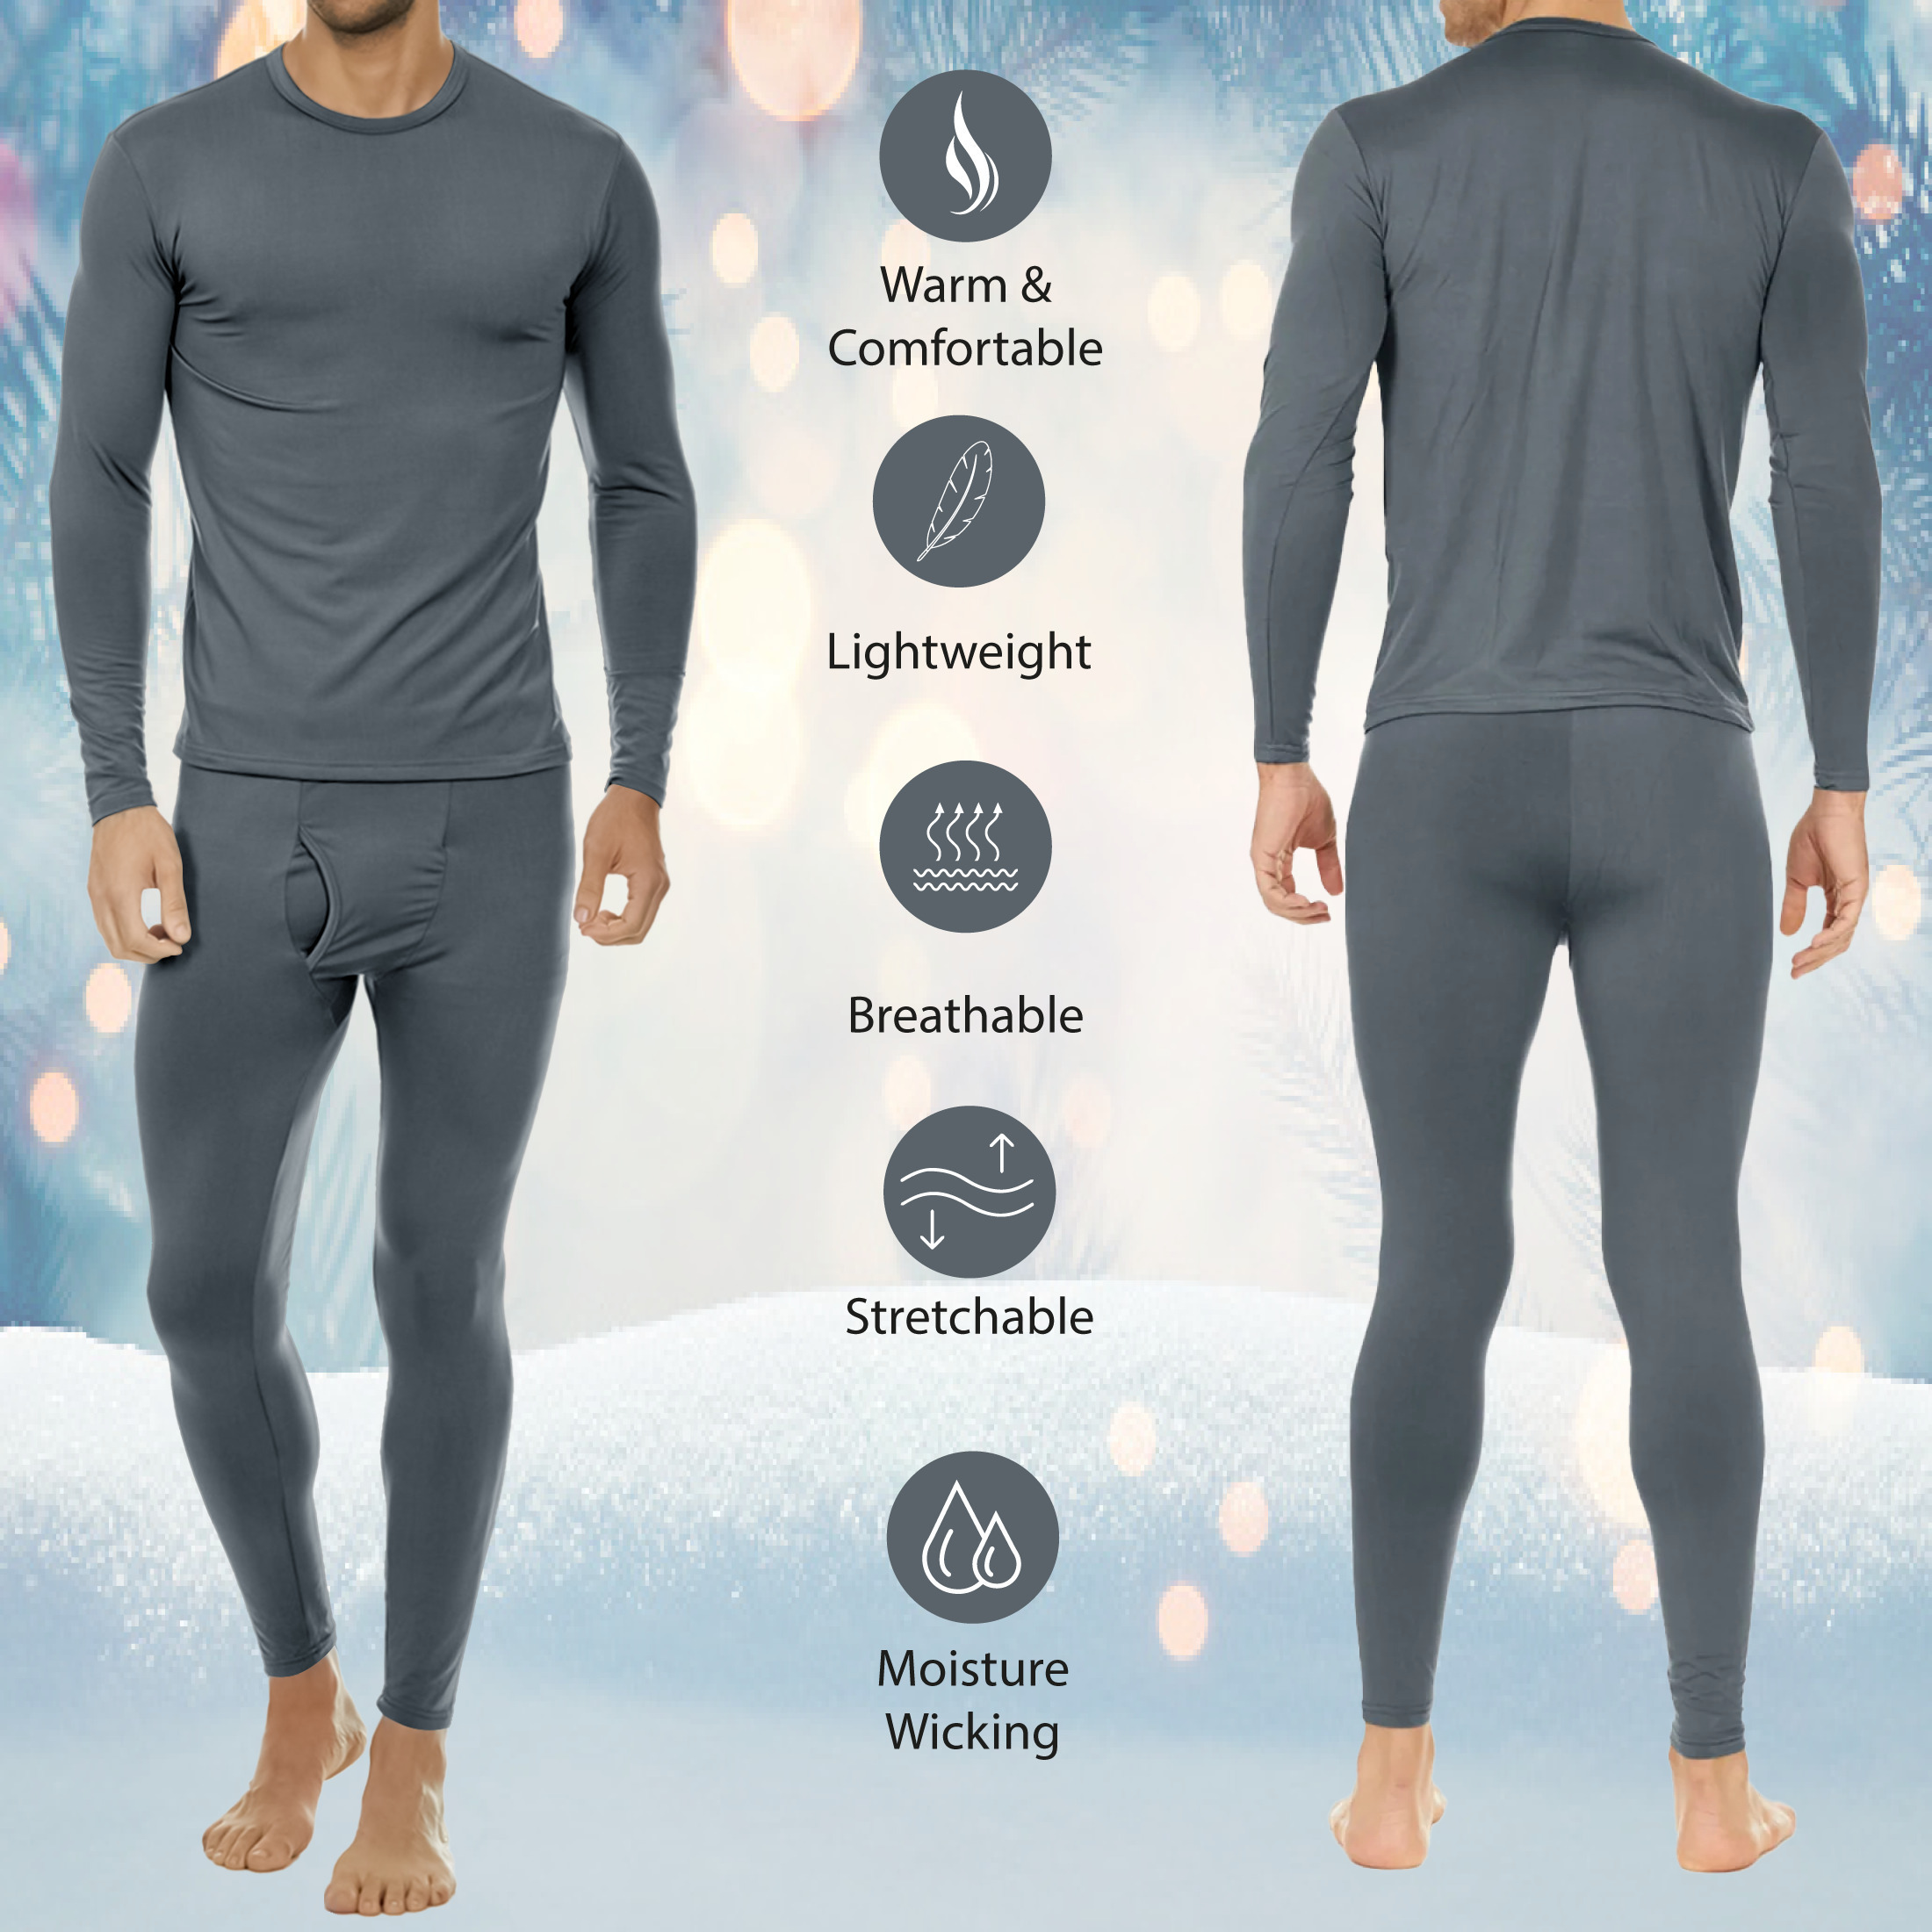 4-Piece: Men's Fleece Lined Thermal Set For Cold Weather - Small